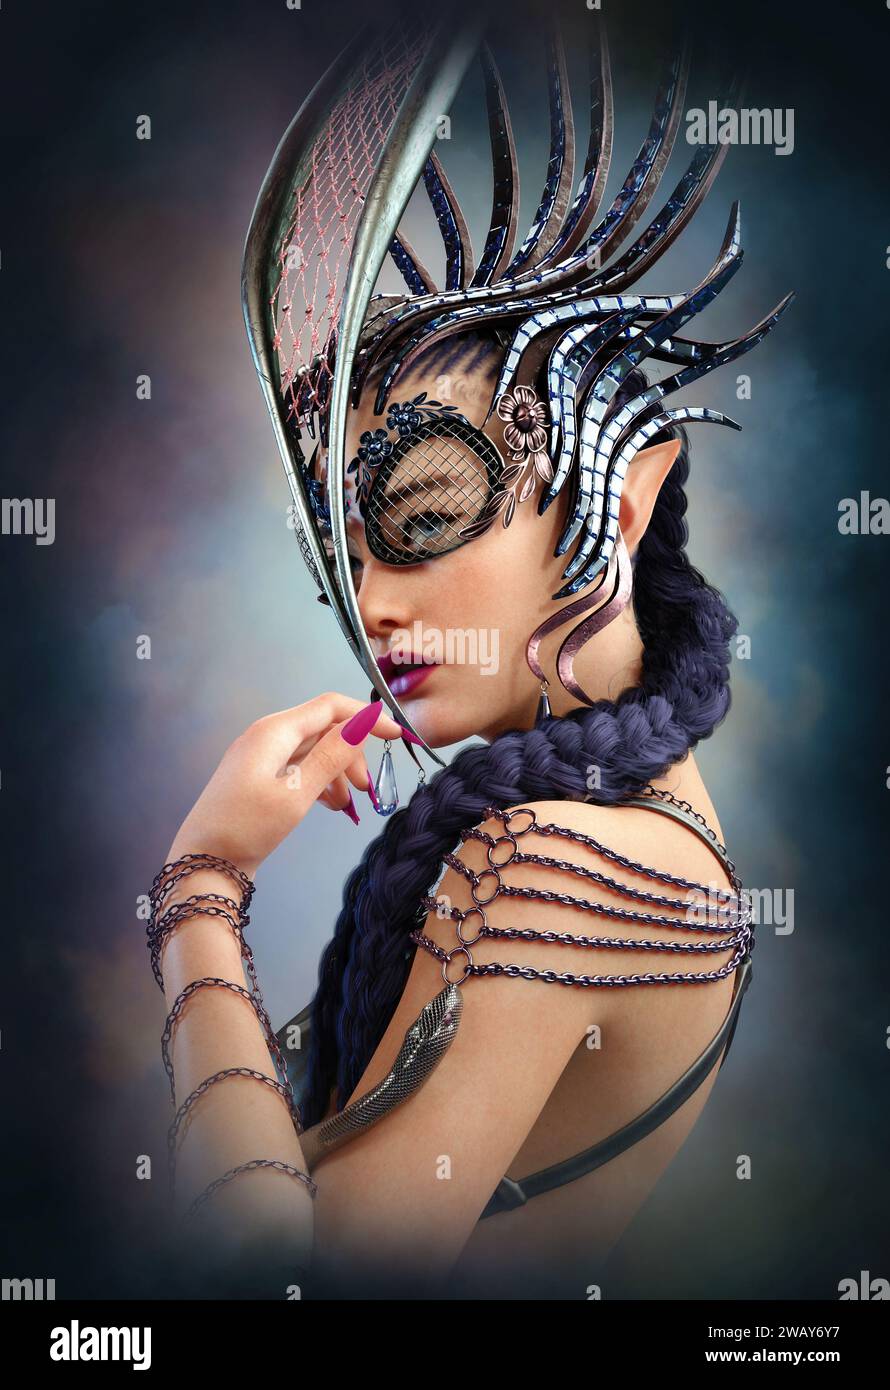 3d computer graphics of a fairy with fantasy jewelry and headdress Stock Photo